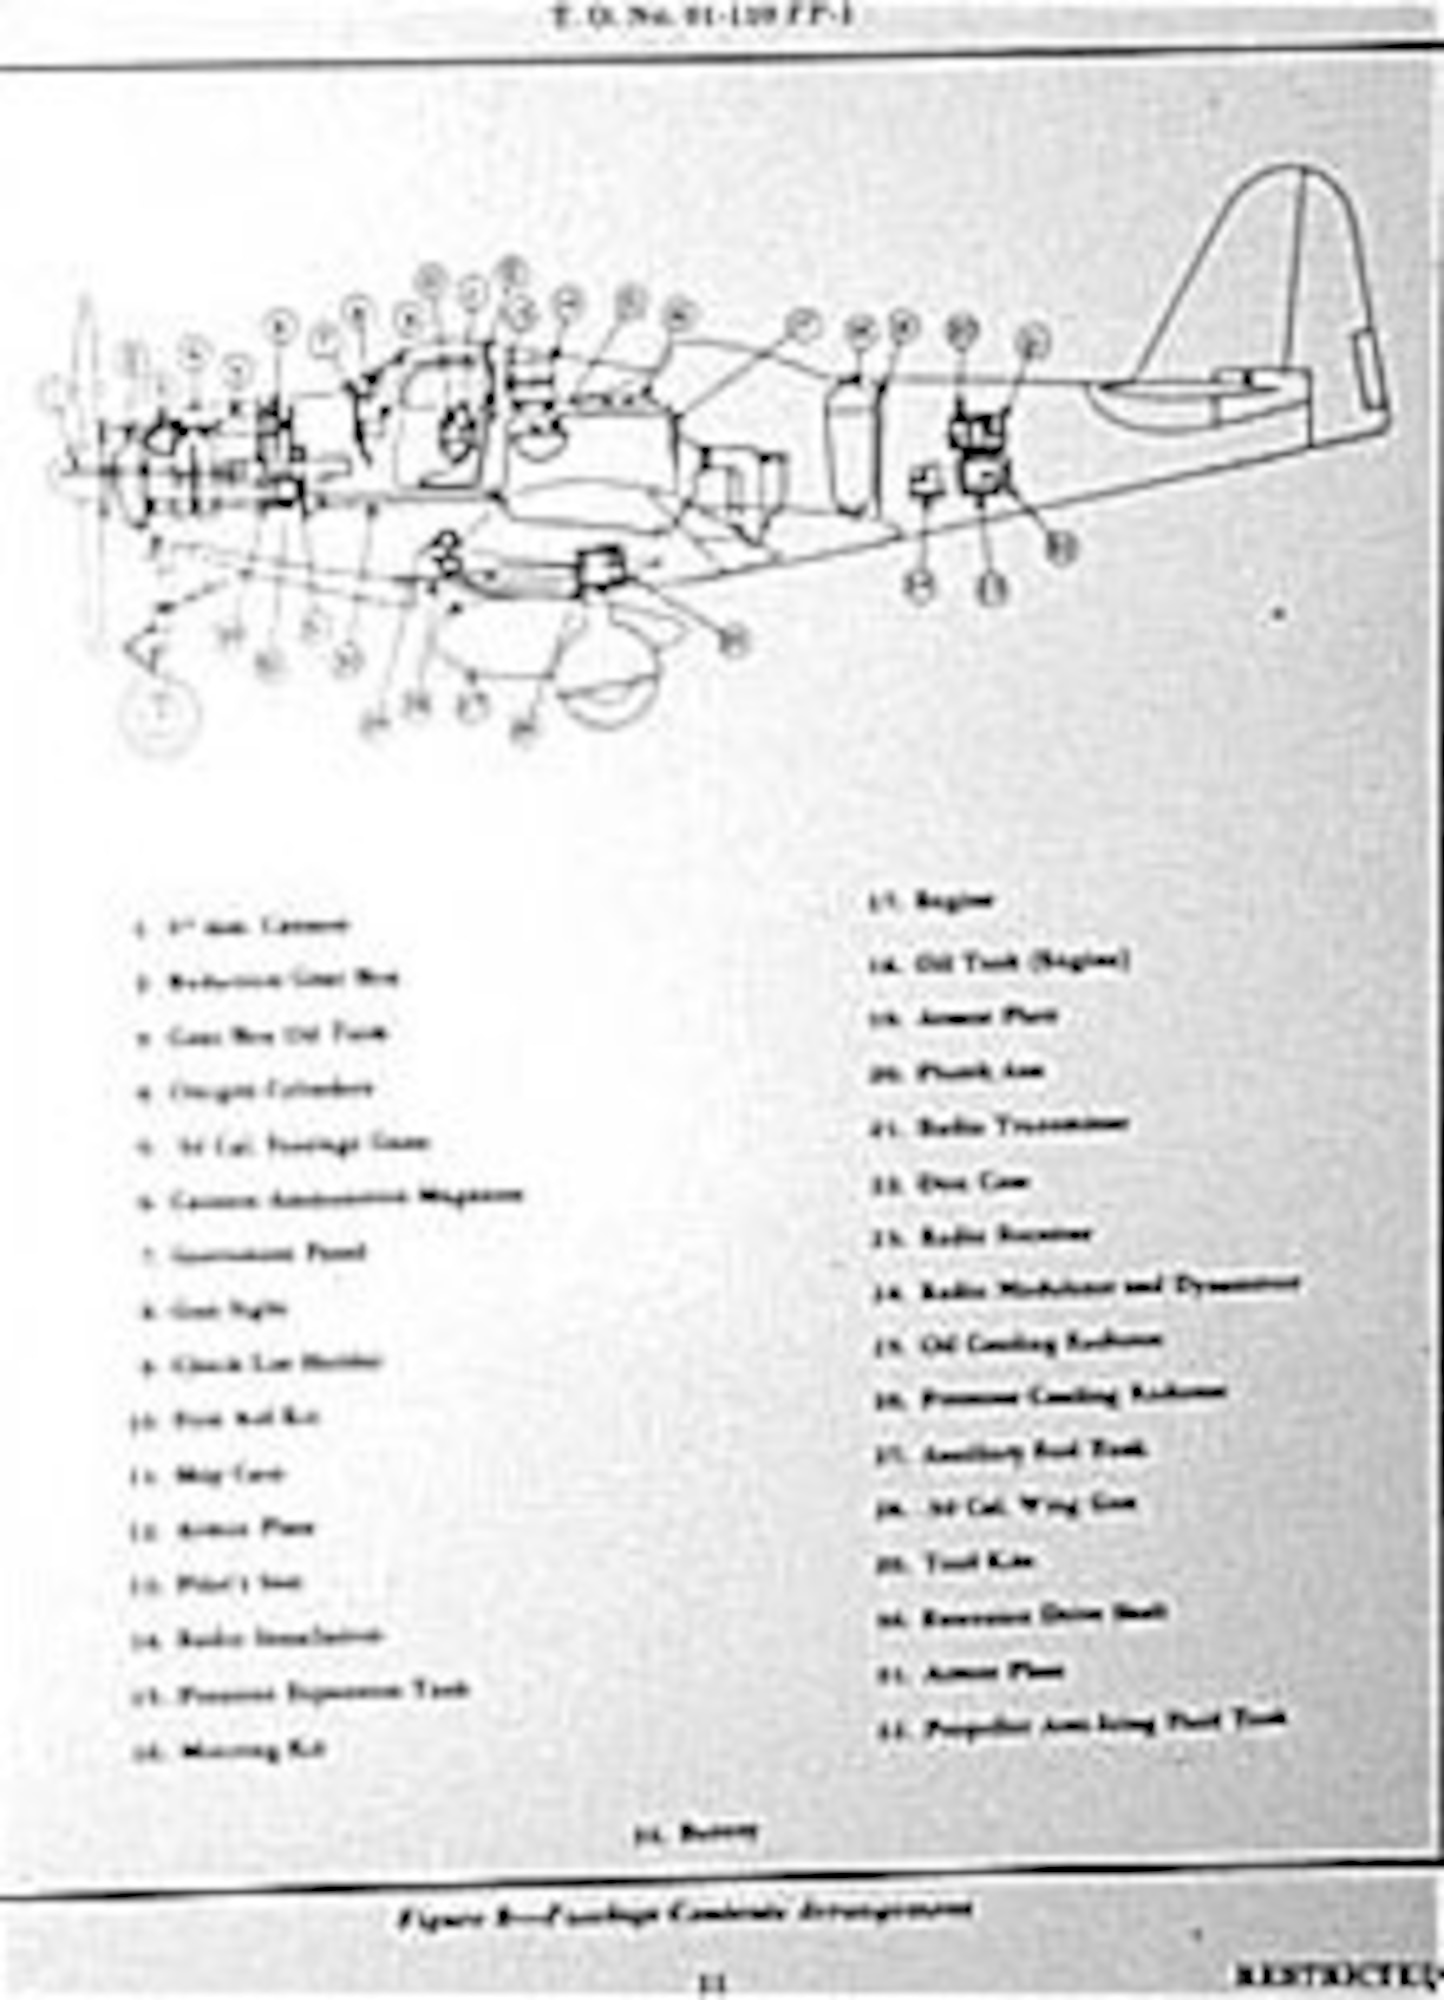 American version of a P-63 flight manual page. (U.S. Air Force photo)